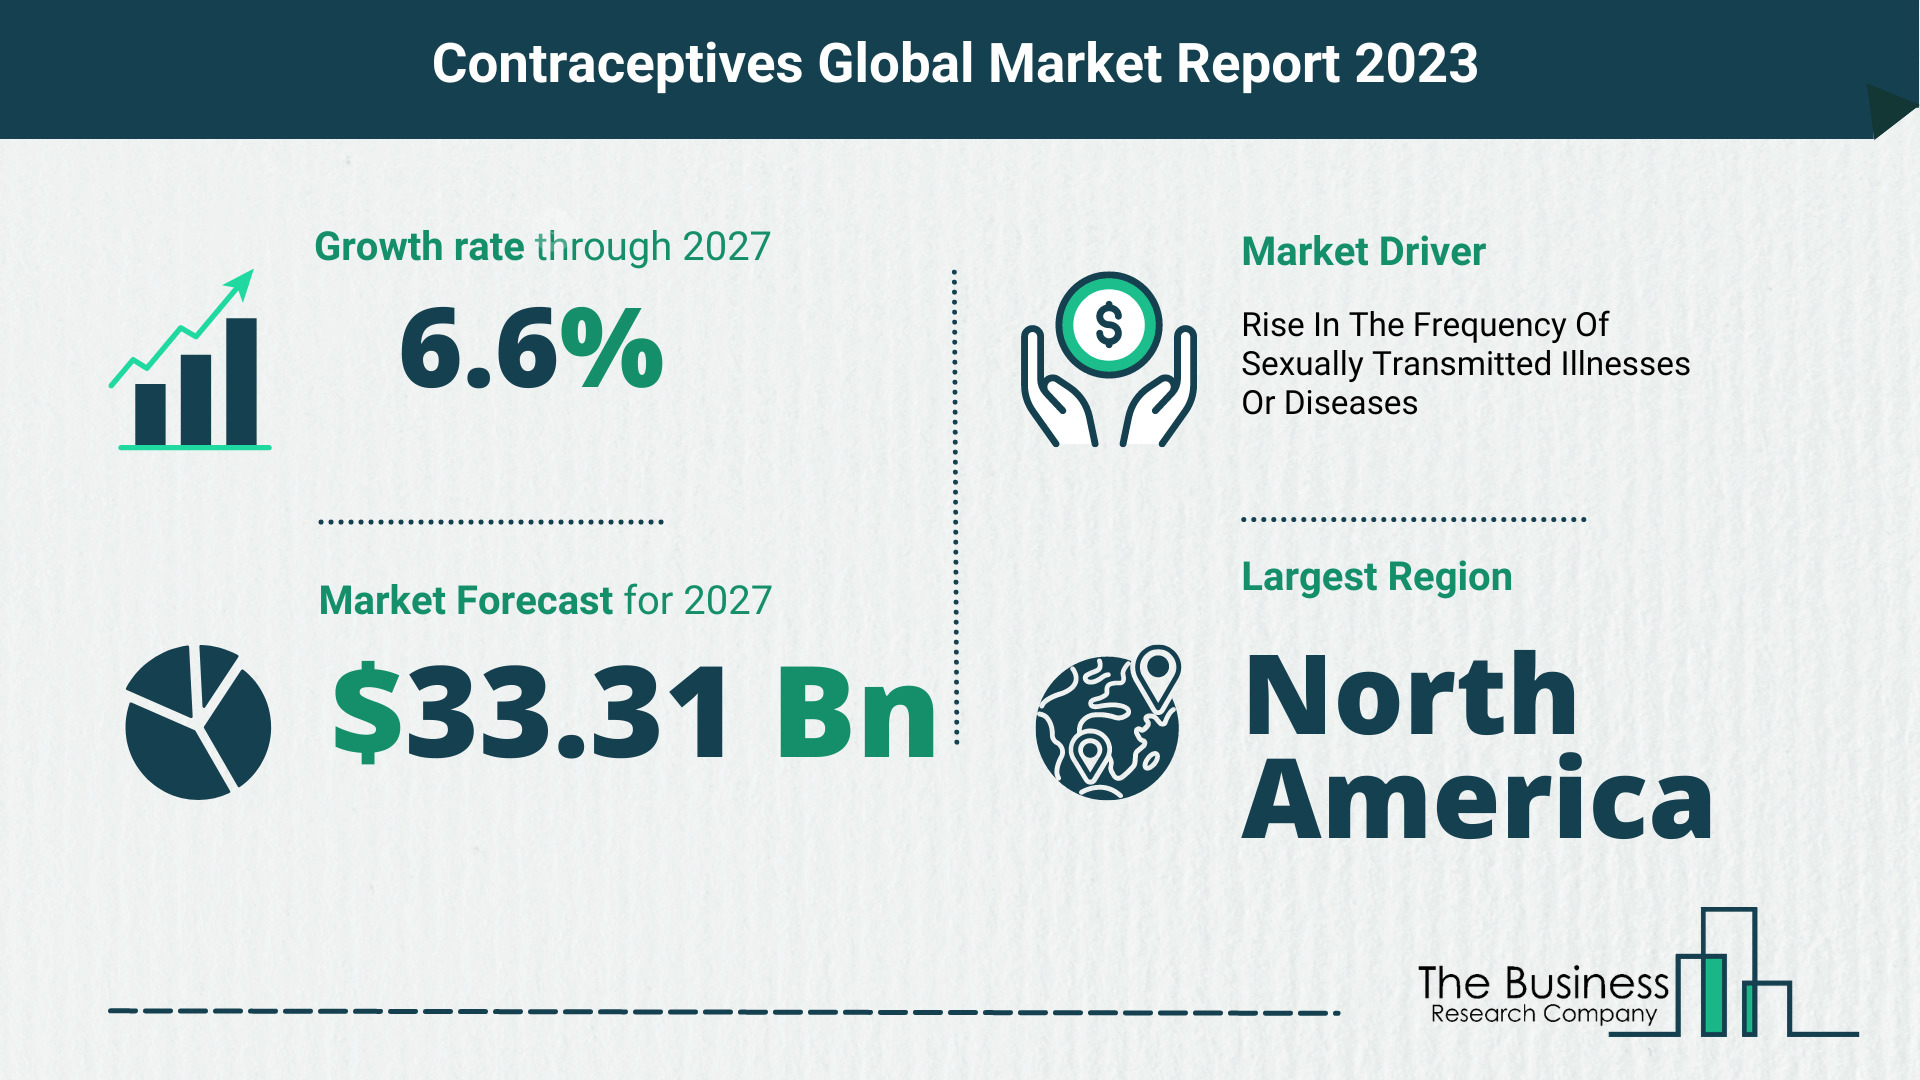 How Will The Contraceptives Market Globally Expand In 2023?